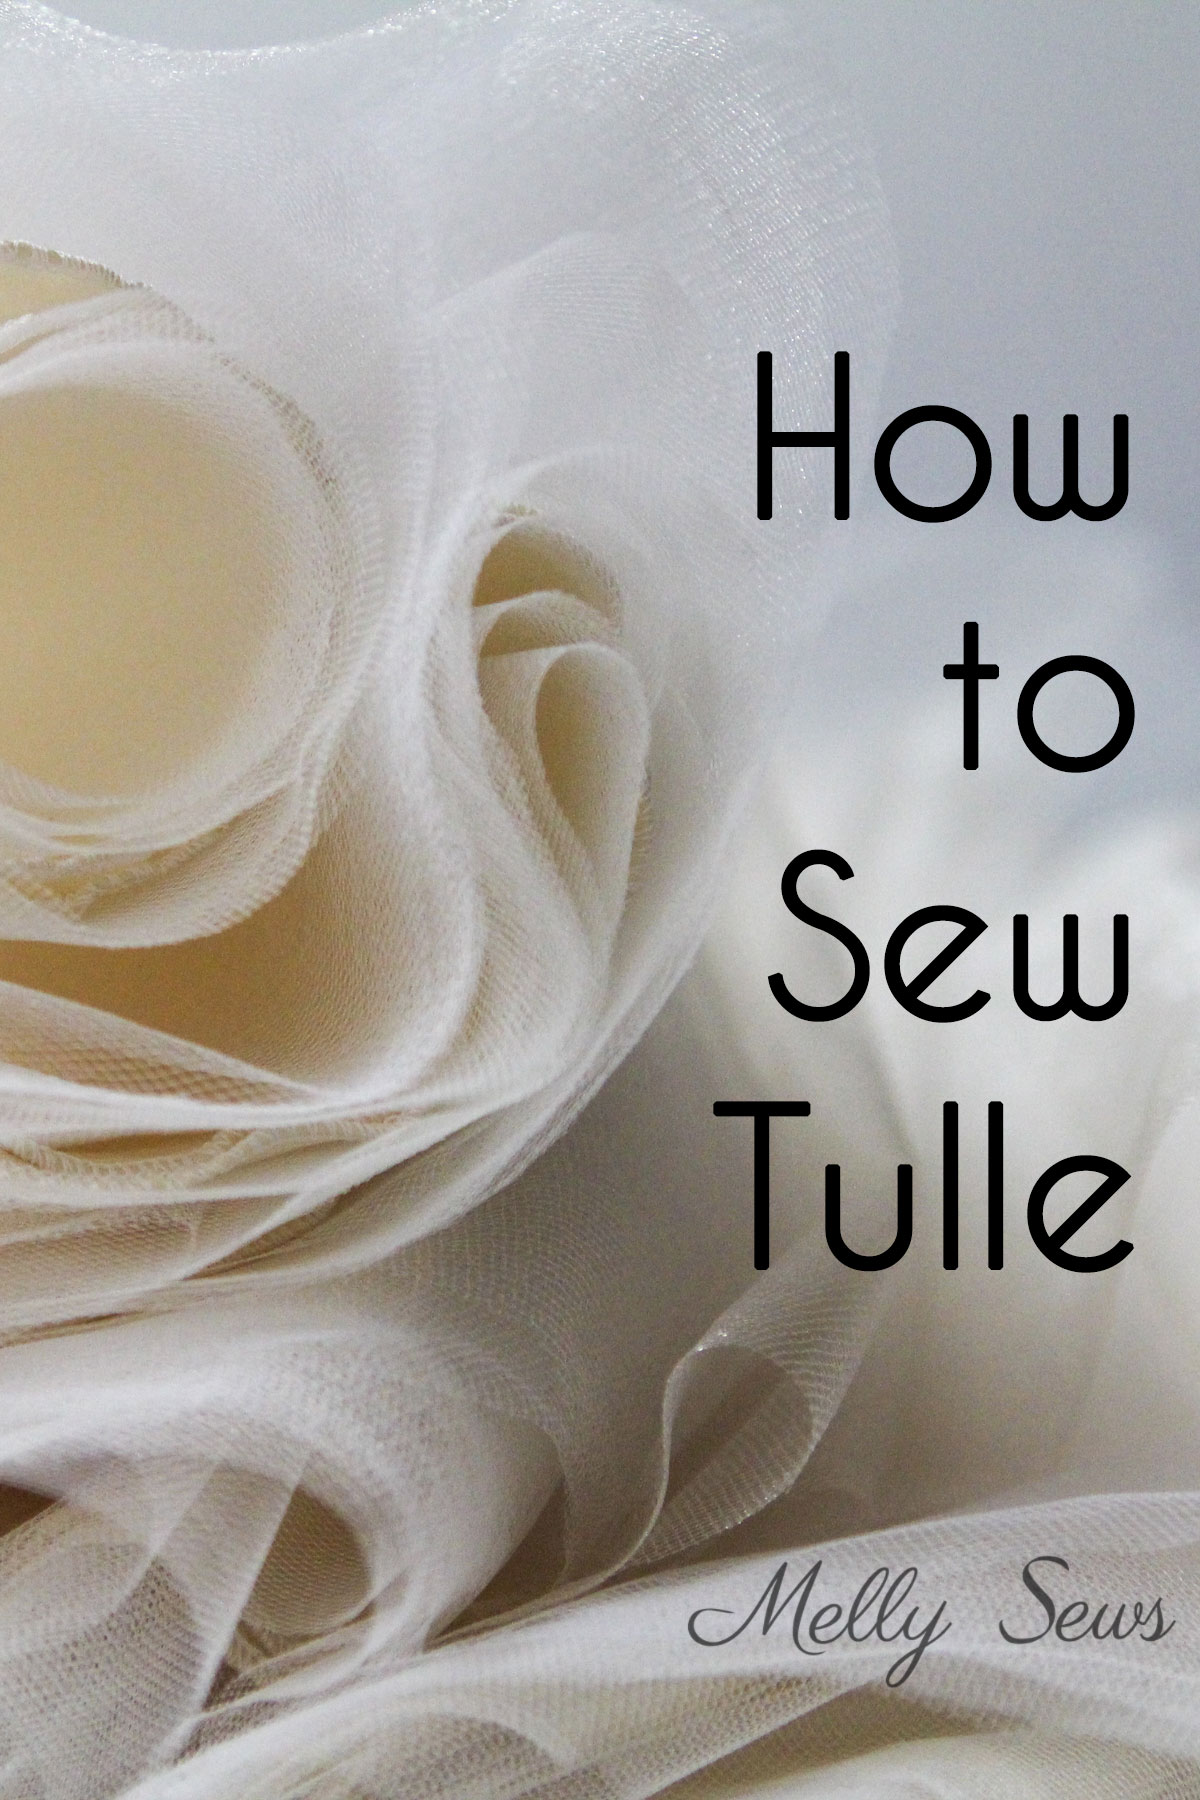 How to Sew Tulle: Tips, Tricks, And Important Details - Melly Sews